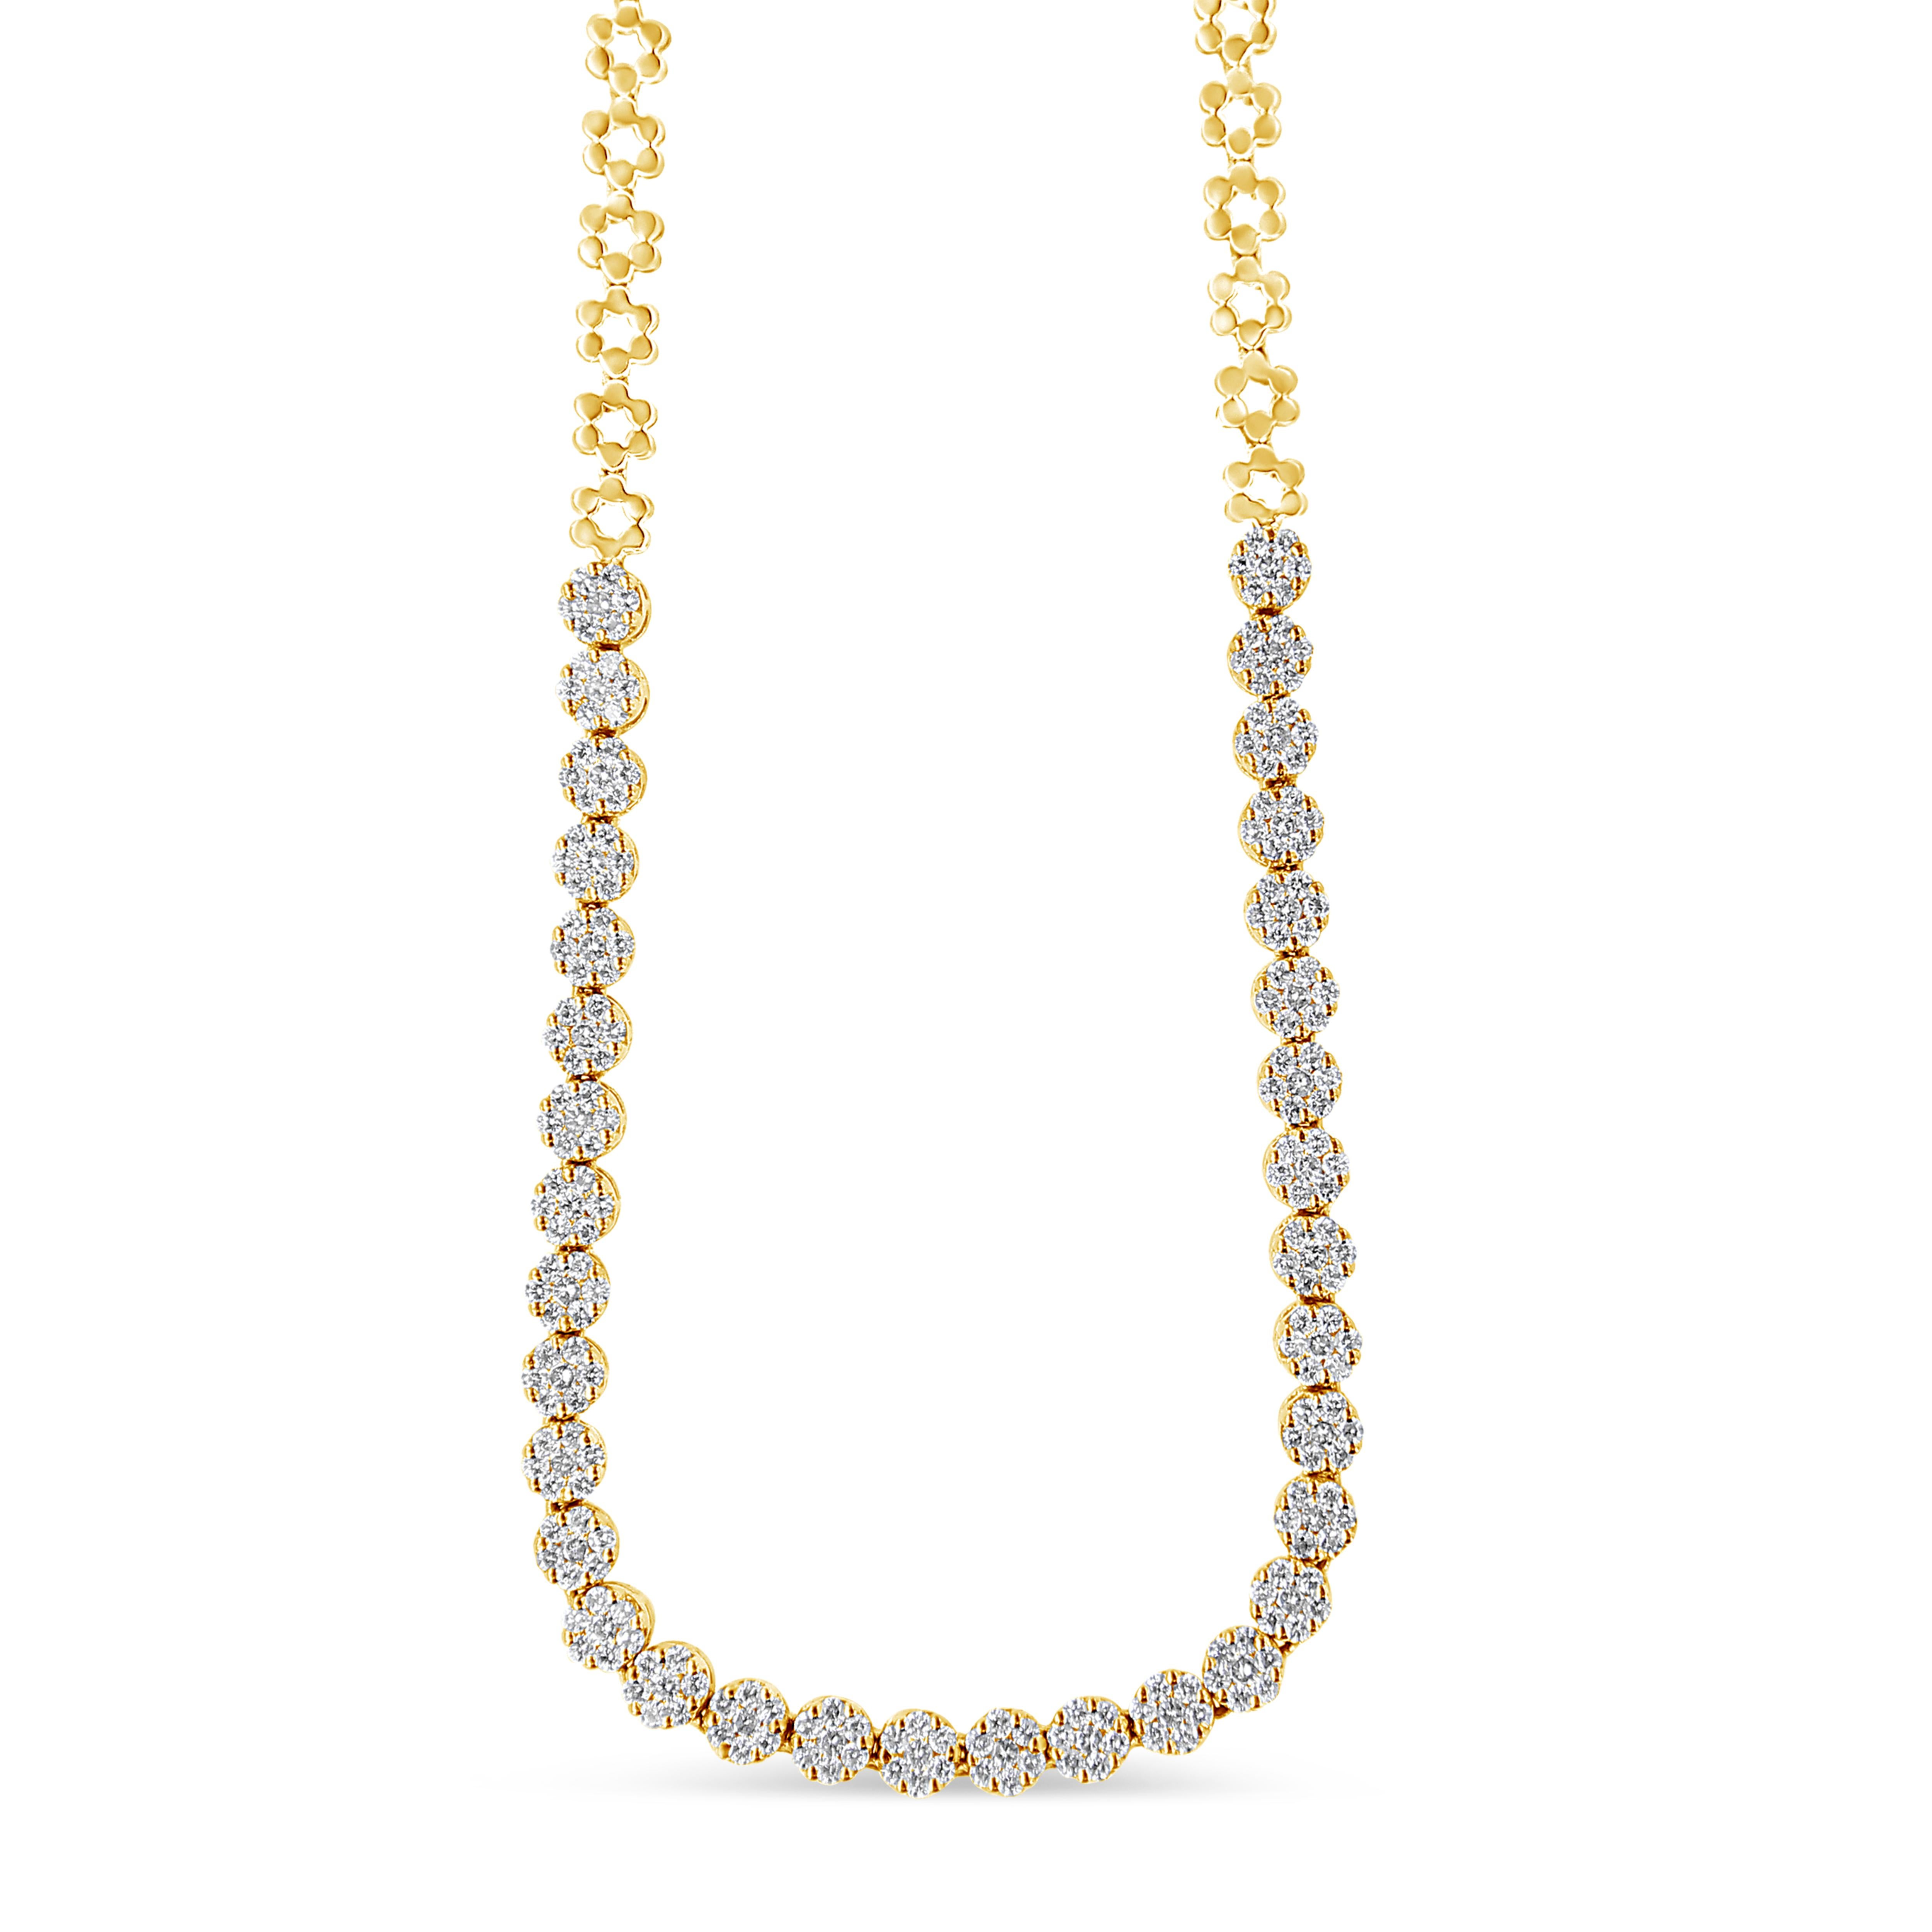 As elegant as it is dramatic, this dazzling Riviera diamond necklace elevates any attire. Expertly crafted in warm weaves of 14K yellow gold, this eye-catching design features flower-shaped clusters of shimmering round diamonds paired with polished